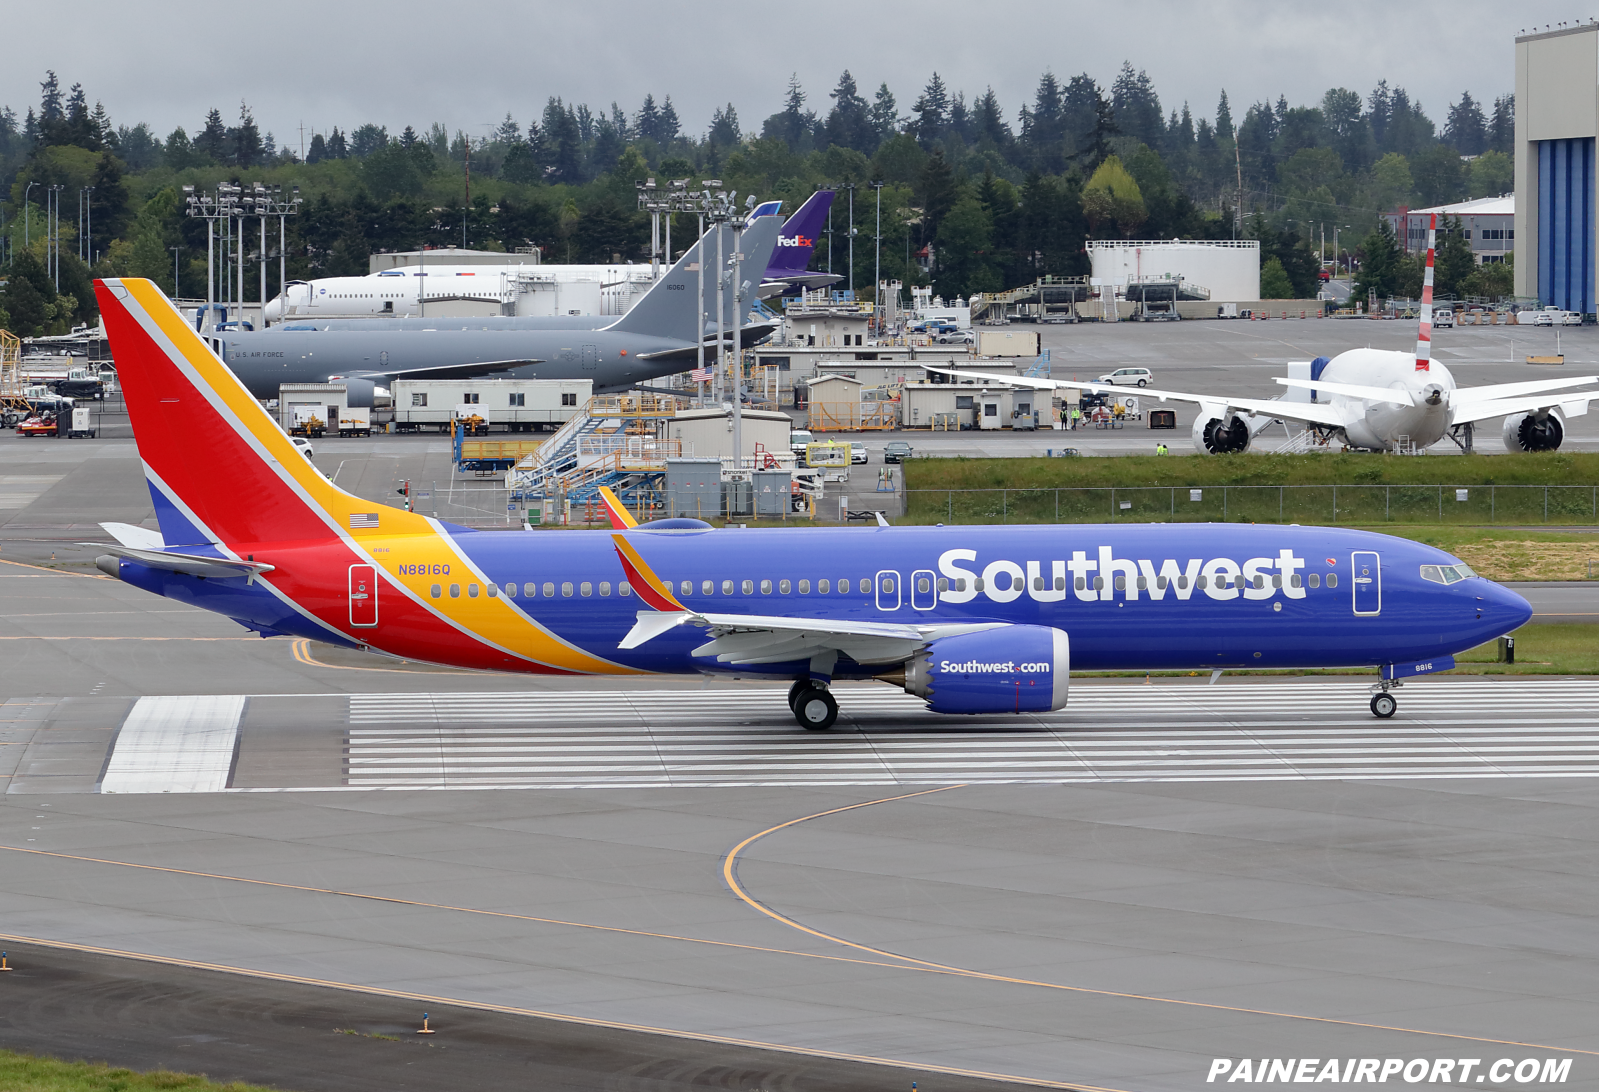 Southwest Airlines 737 N8816Q at KPAE Paine Field